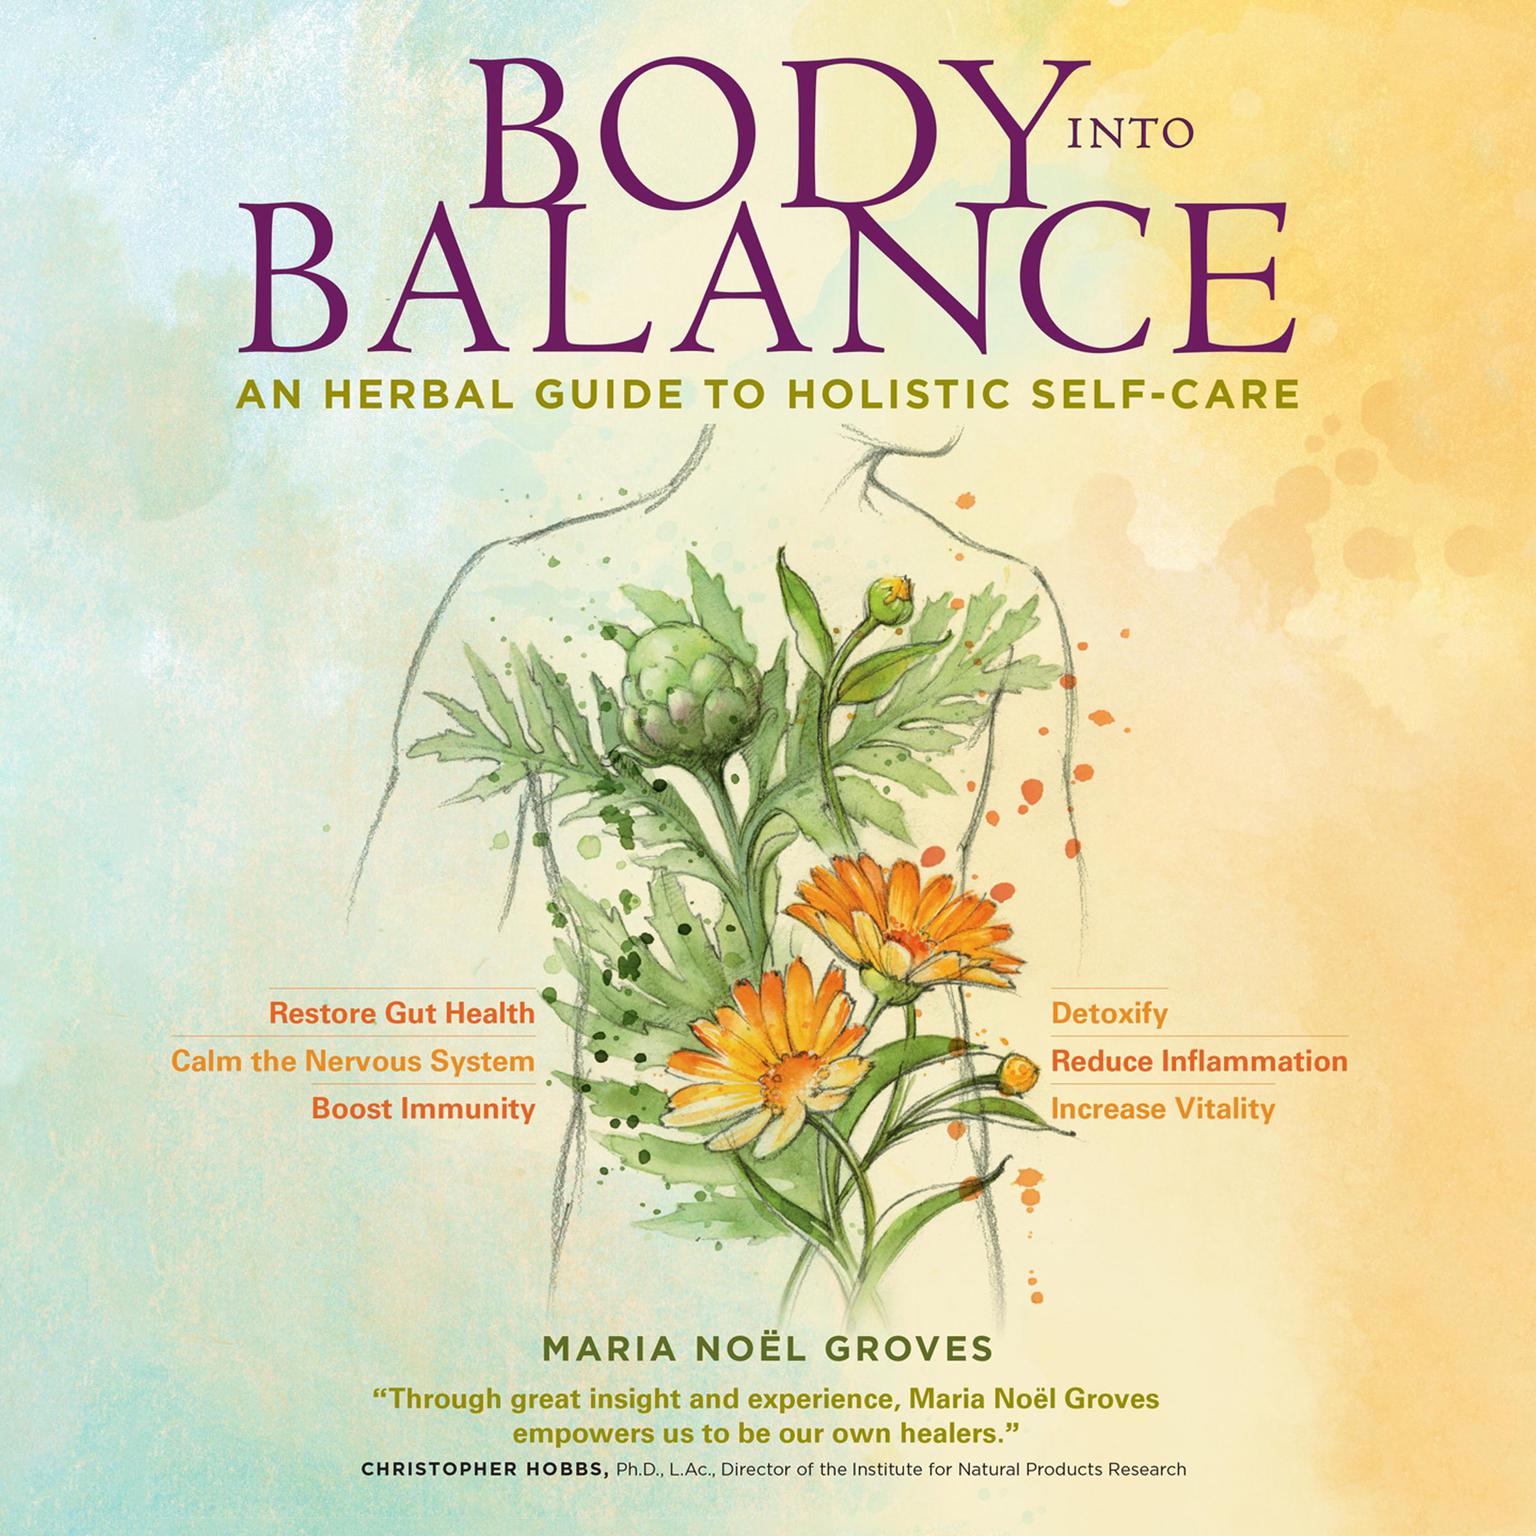 Body into Balance: An Herbal Guide to Holistic Self-Care Audiobook, by Maria Noël Groves